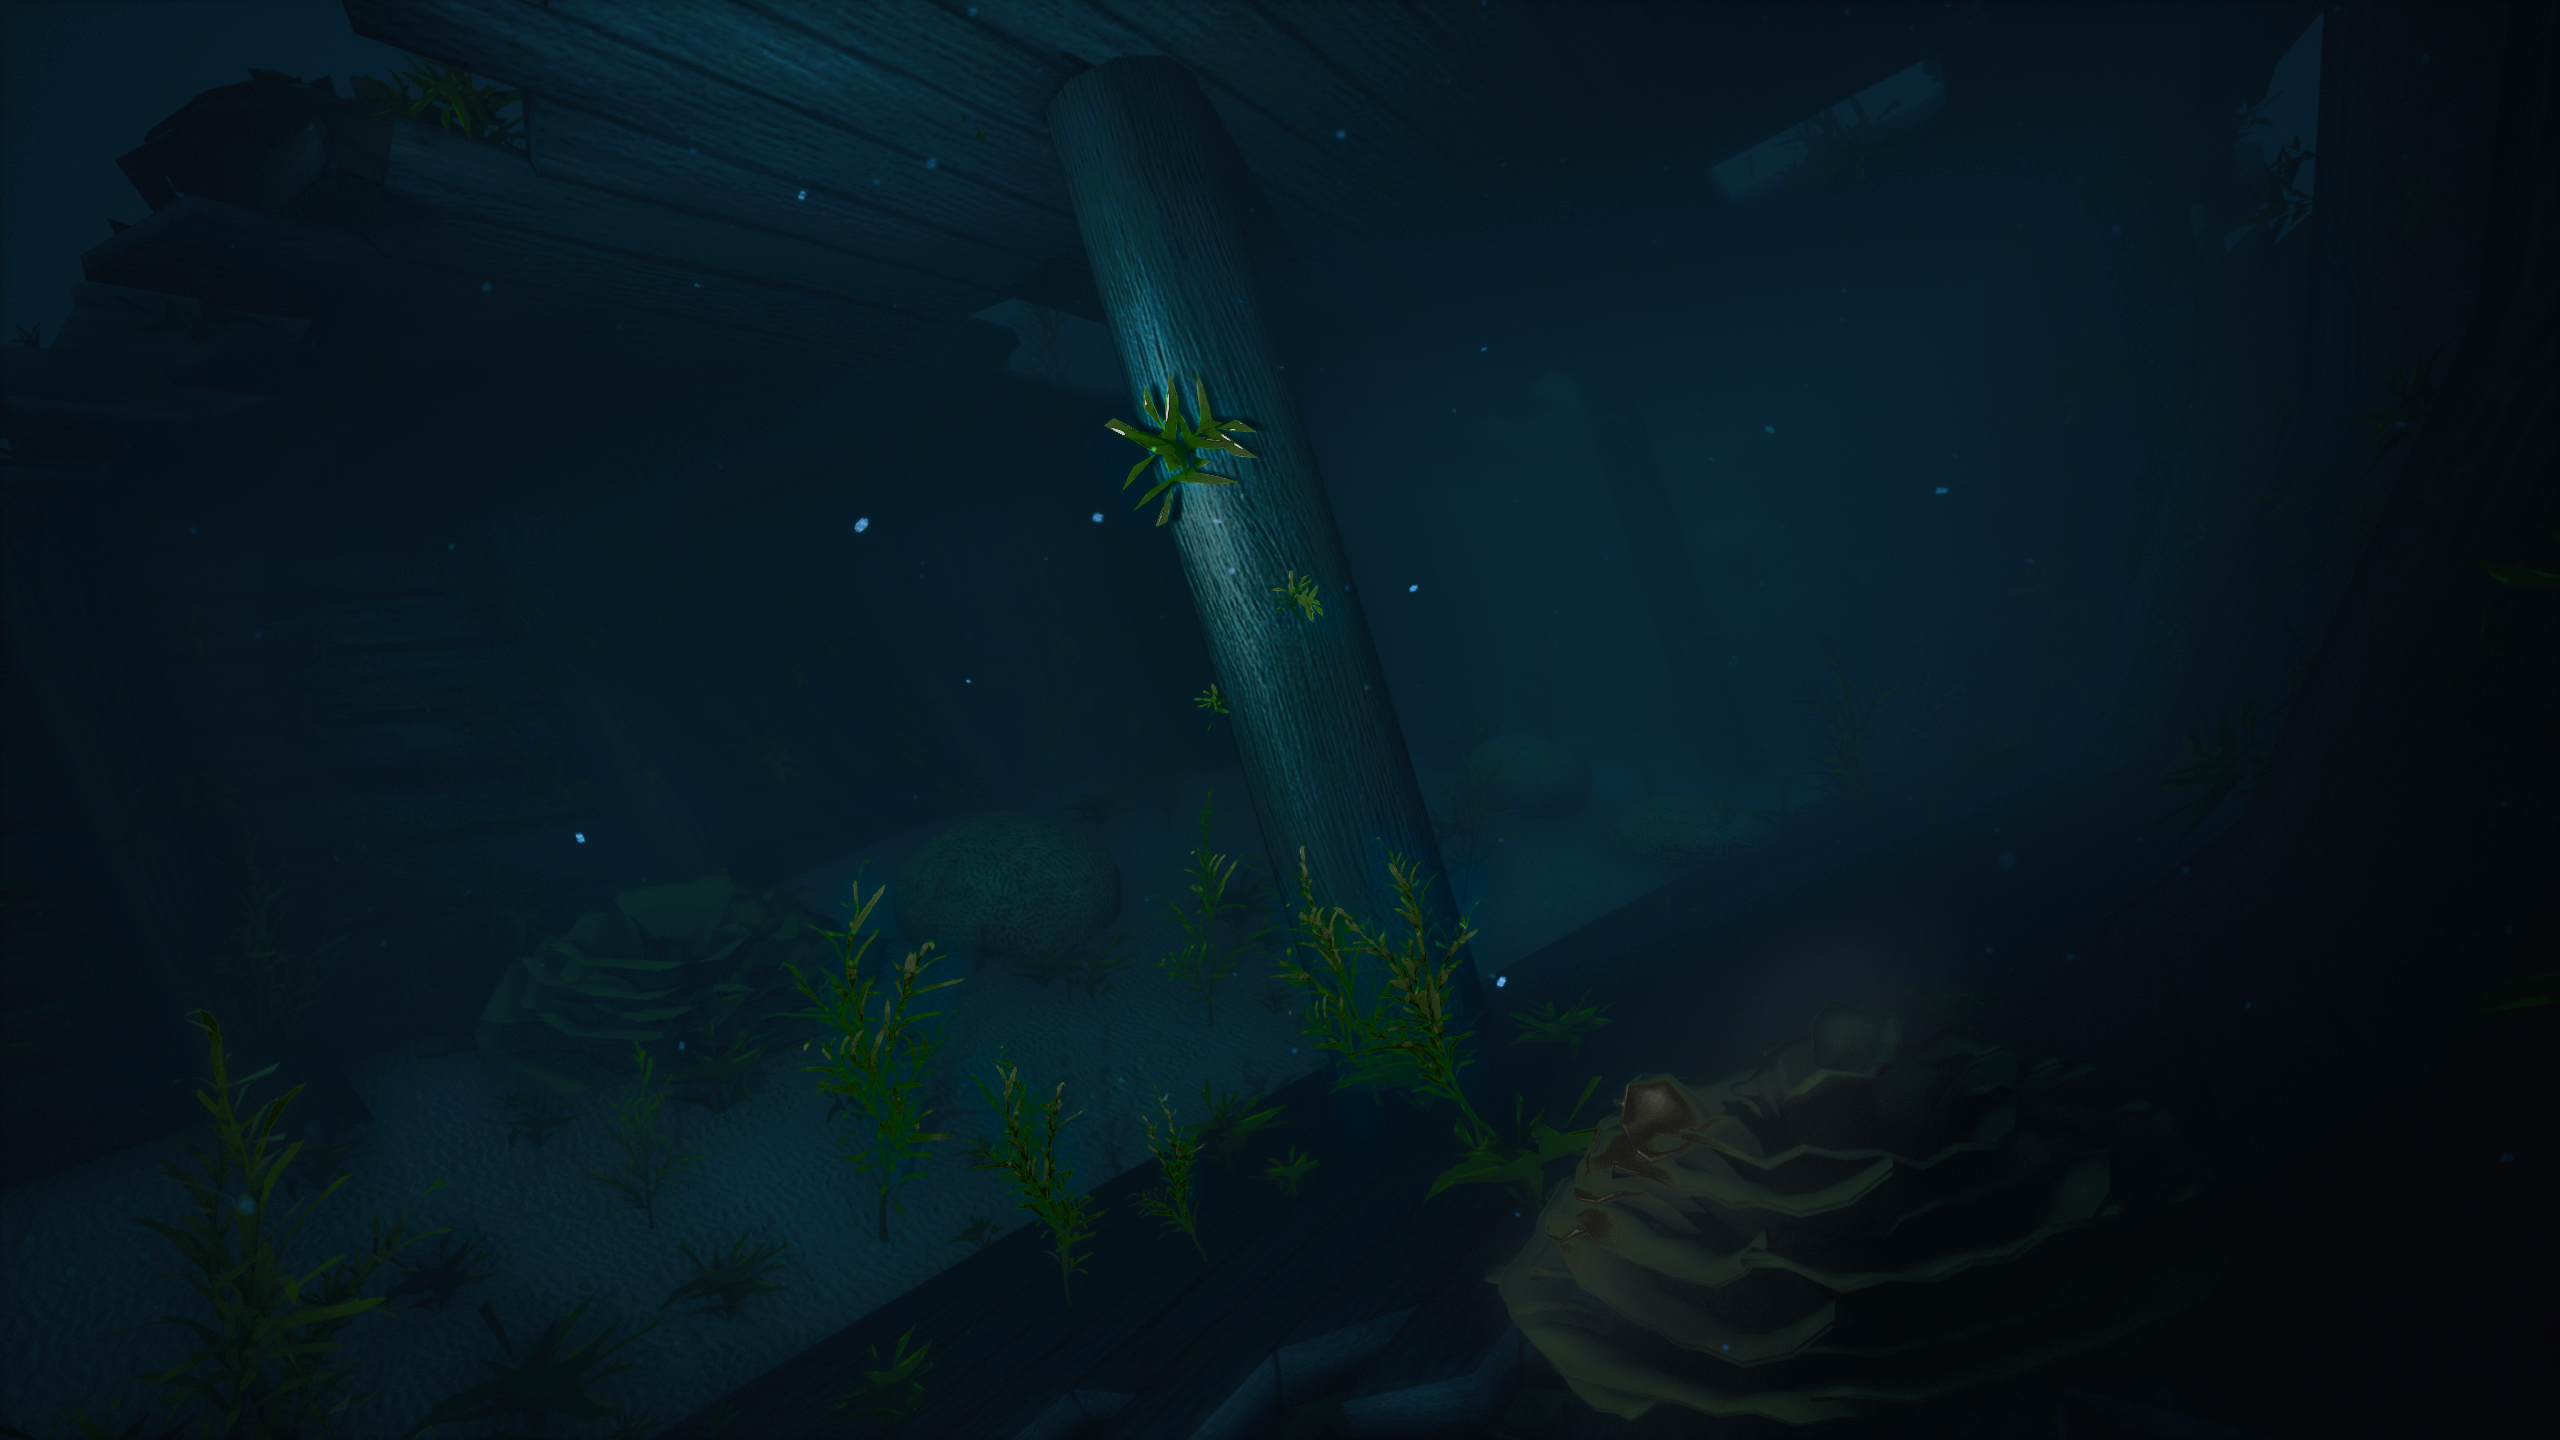 Sunken ship at night and illuminated by the divers flashlight.